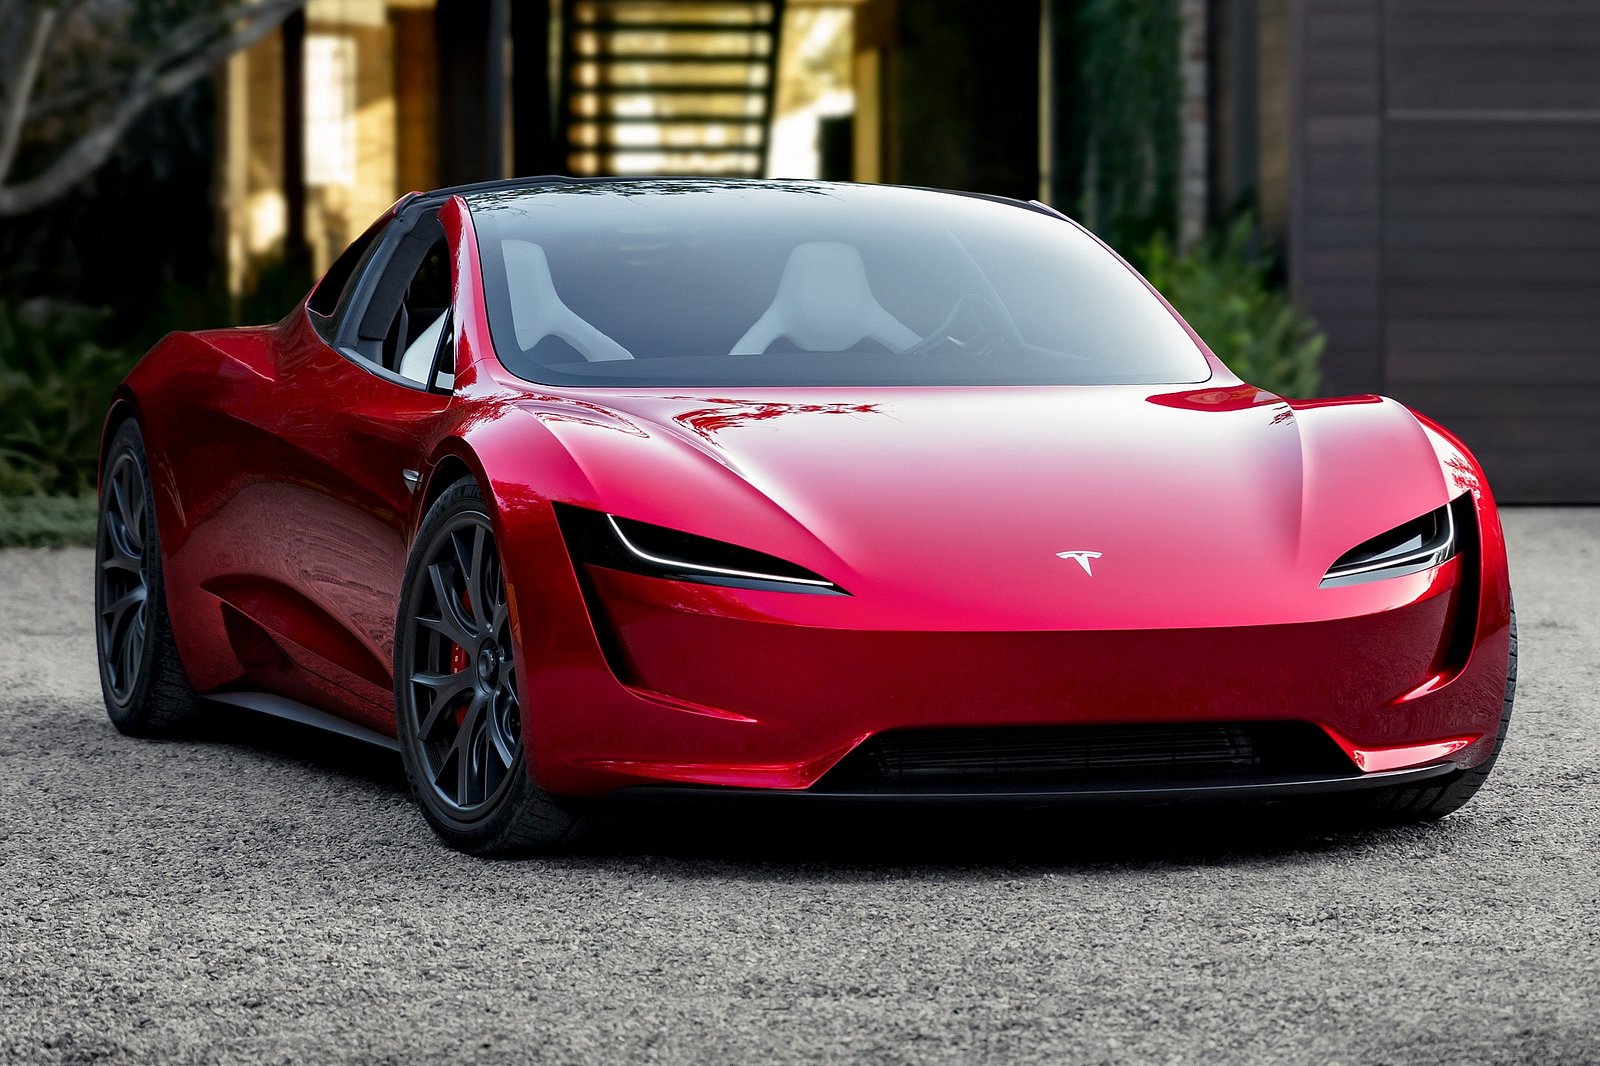 Tesla Roadster Arriving 2025 With Sub-1-Second 0-60 Time